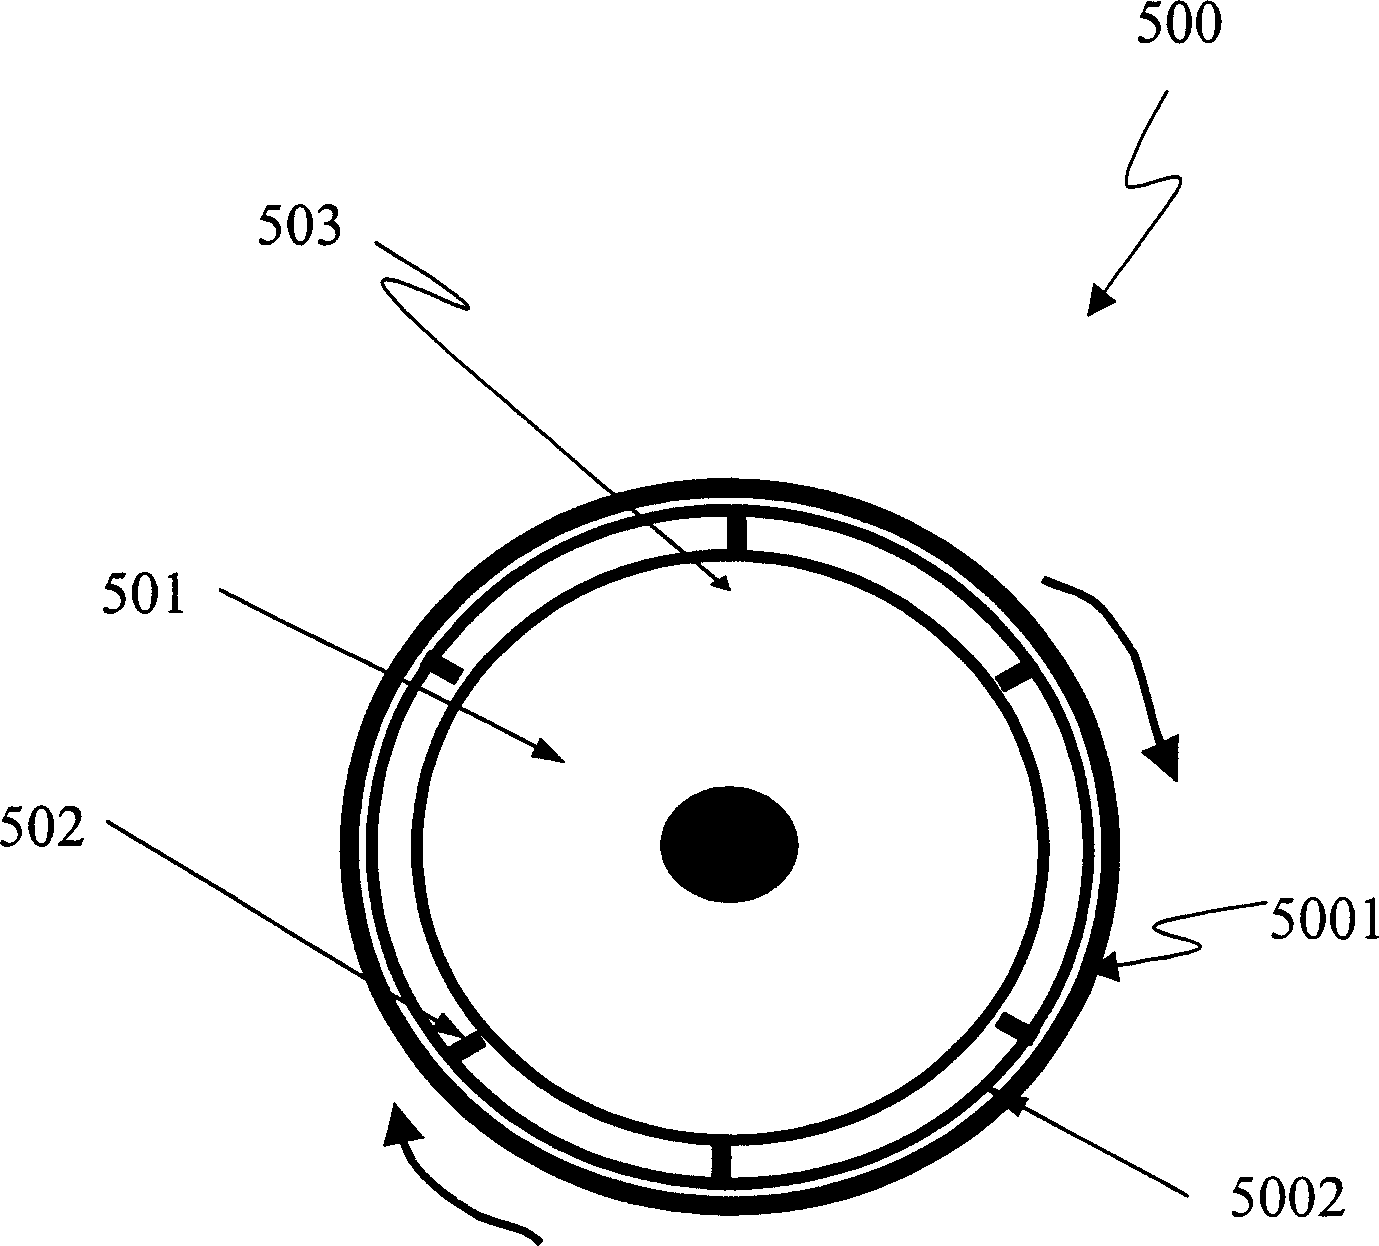 Method for cleaning semiconductor wafer